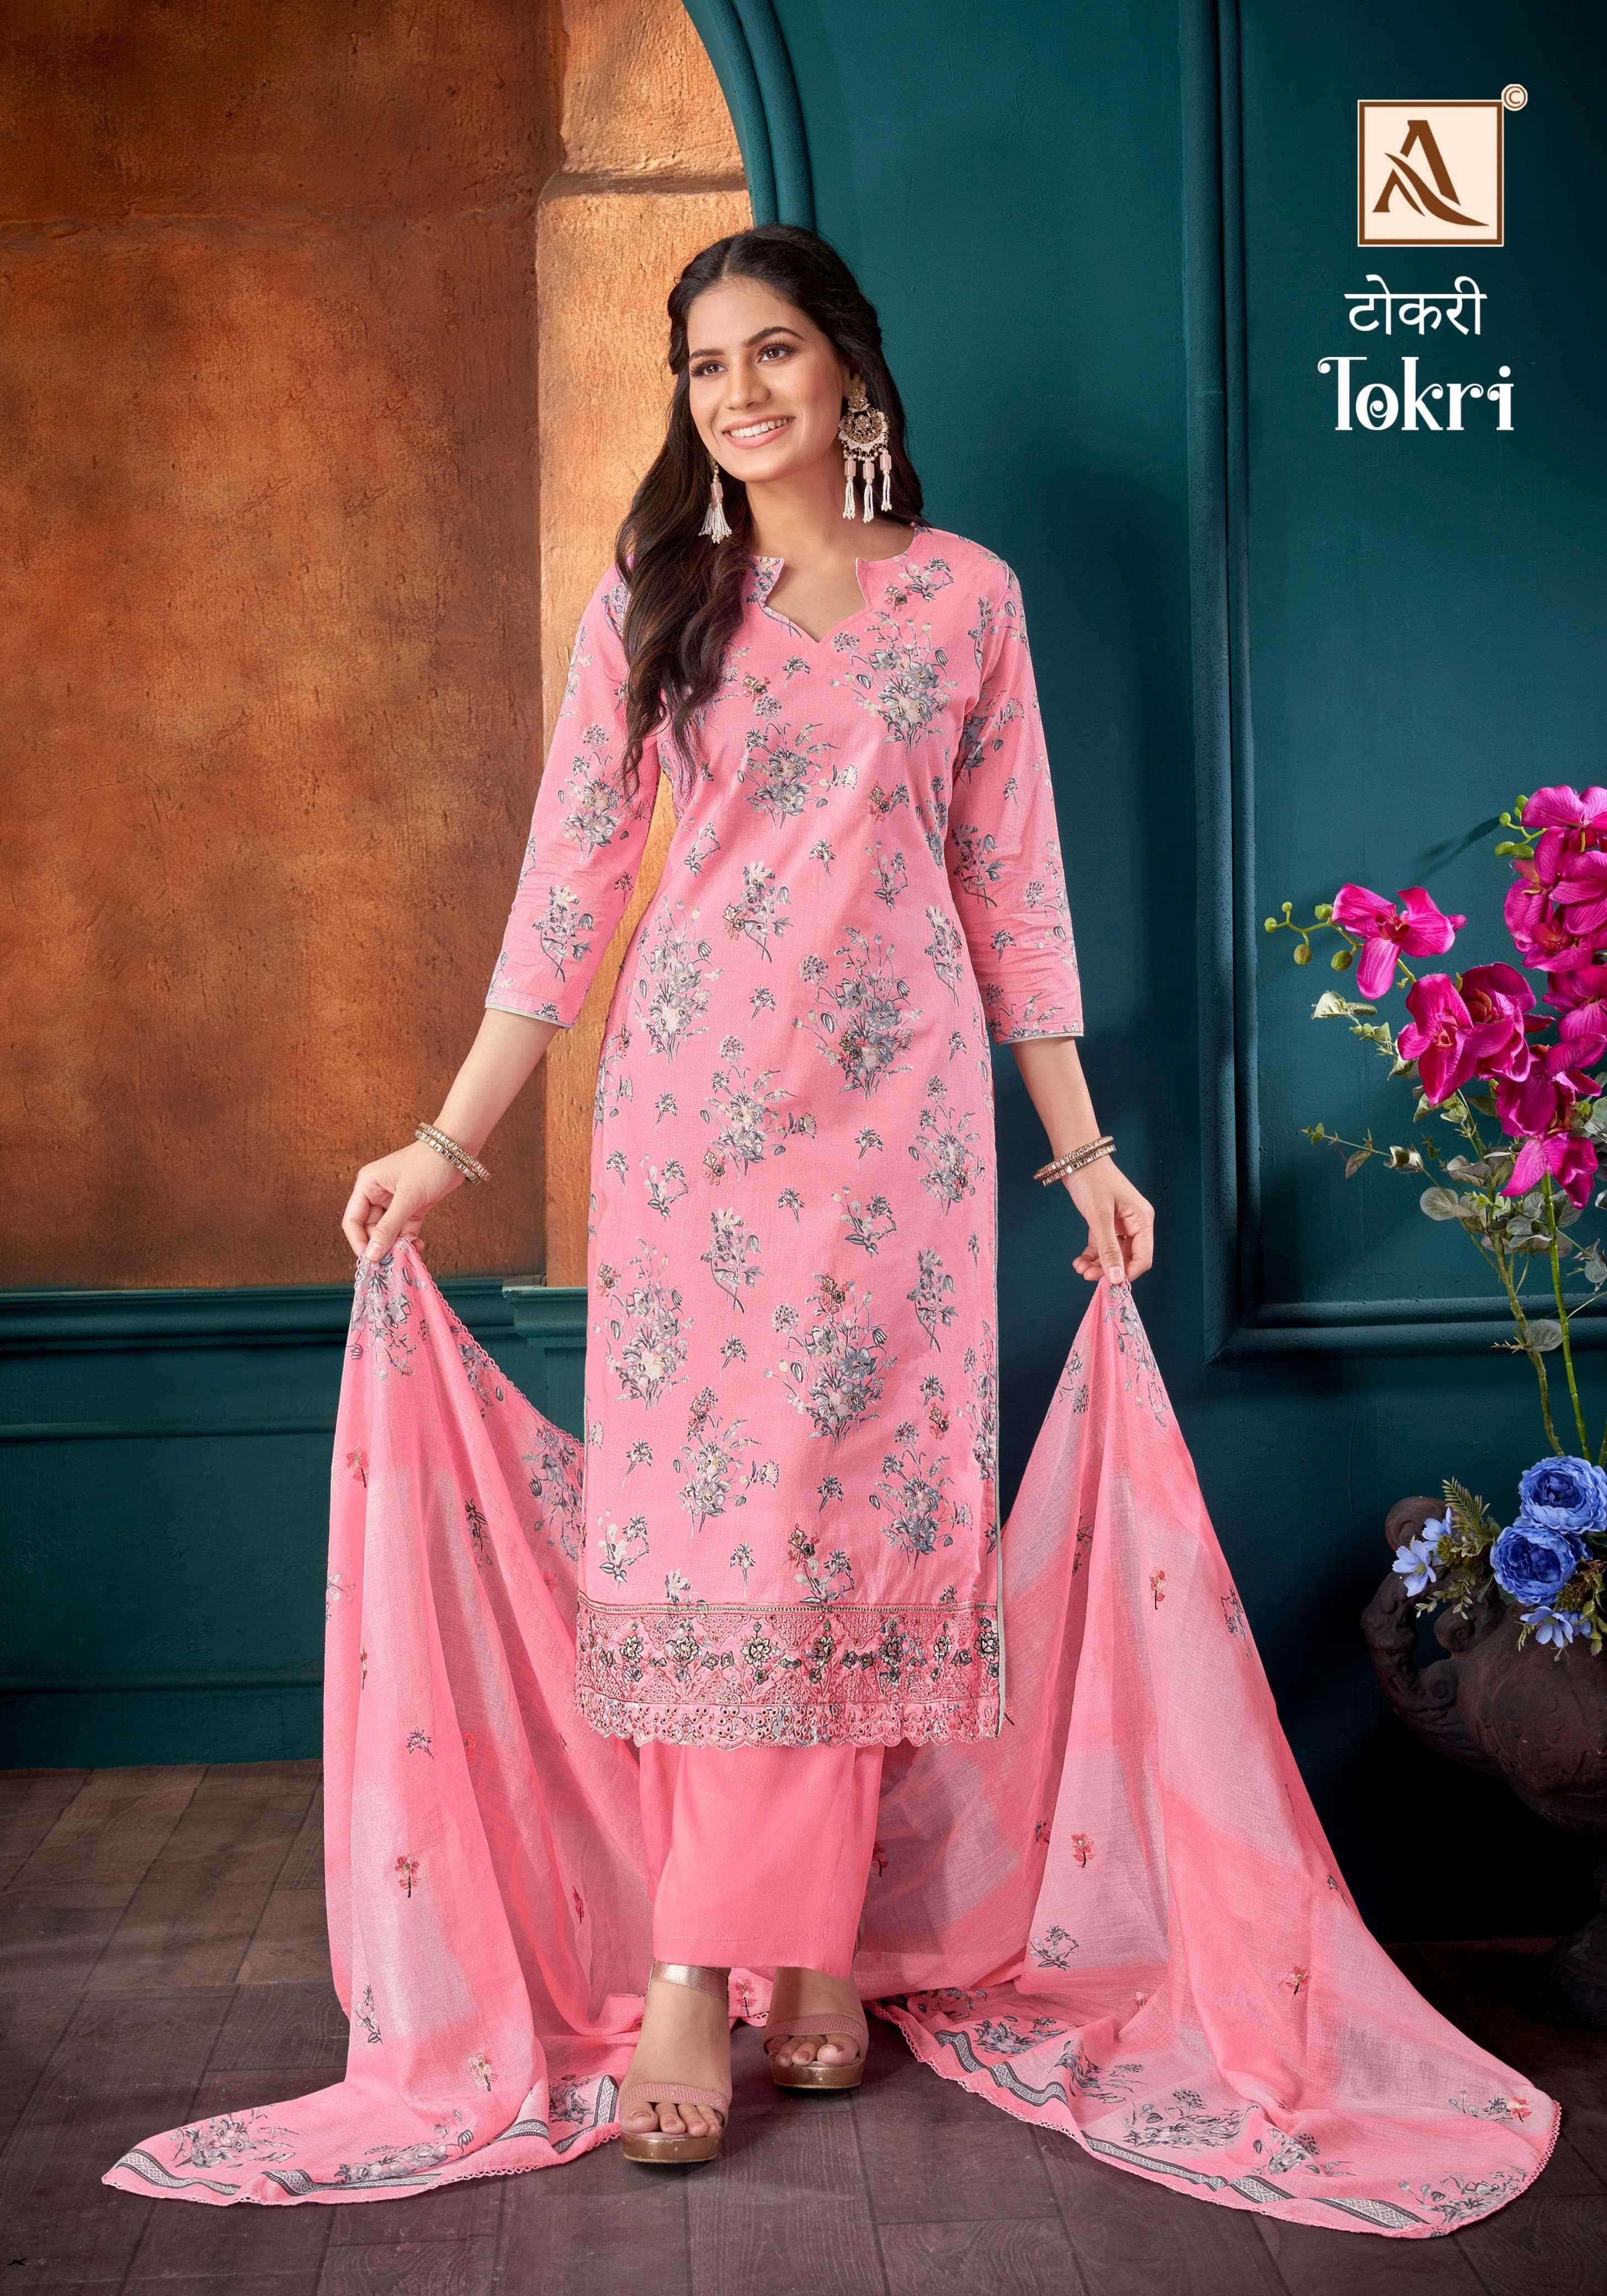 TOKRI SERIES 1525 BY ALOK SUITS DESIGNER FLORAL PRINTED AND WORK CAMBRIC COTTON SUITS ARE AVAILABLE AT WHOLESALE PRICE